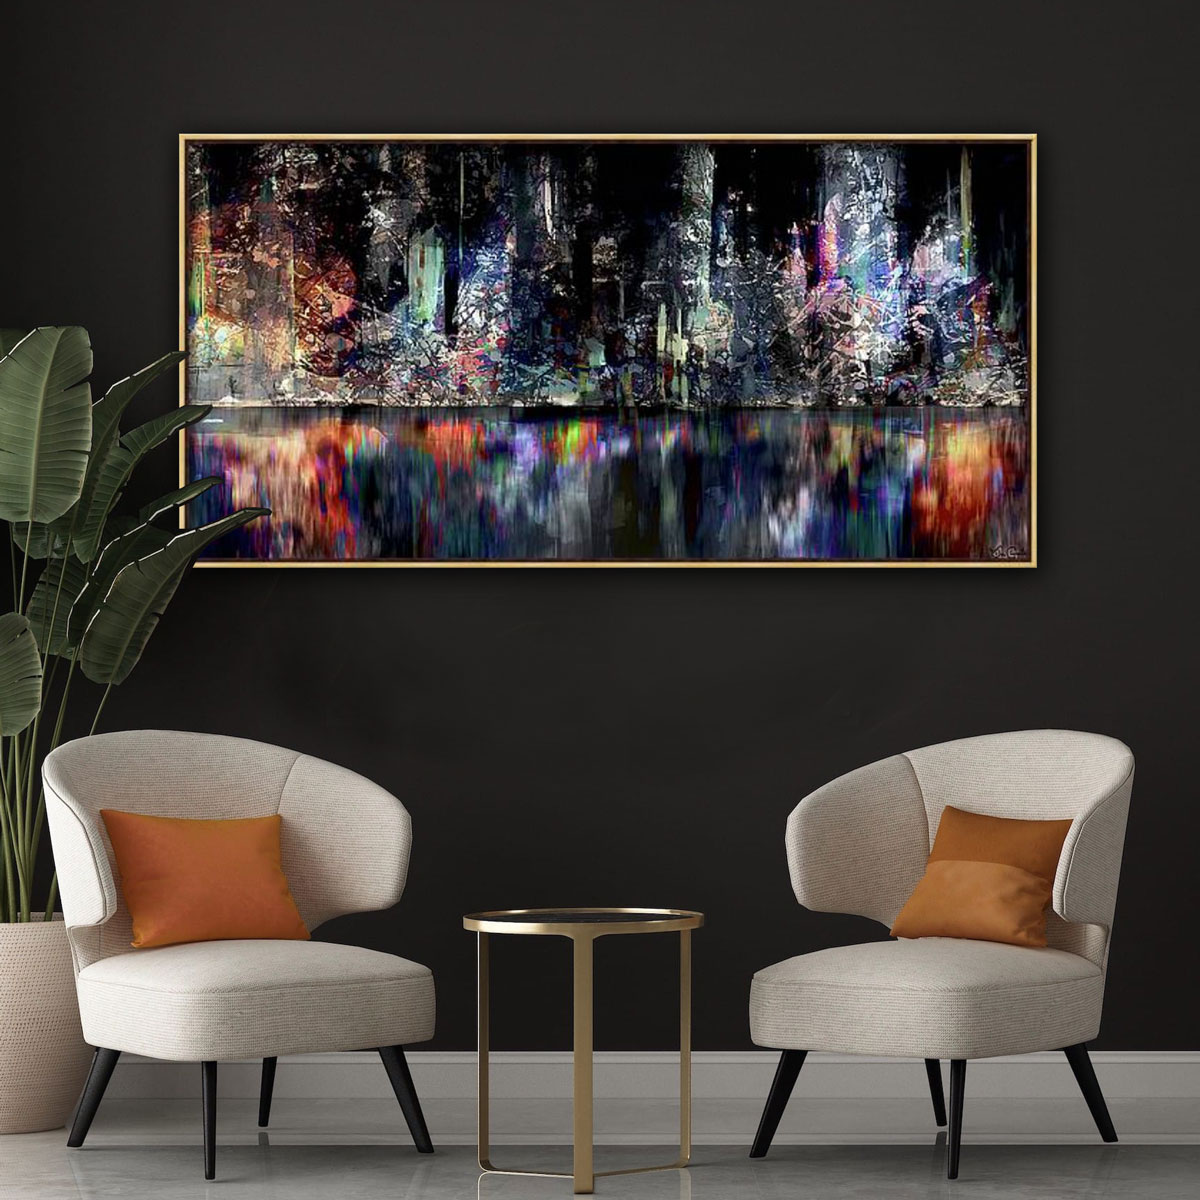 Contemporary Abstract Art - Modern Abstract Cityscape Painting - Large Abstract Wall Art Art For Sale - Boston Harbor